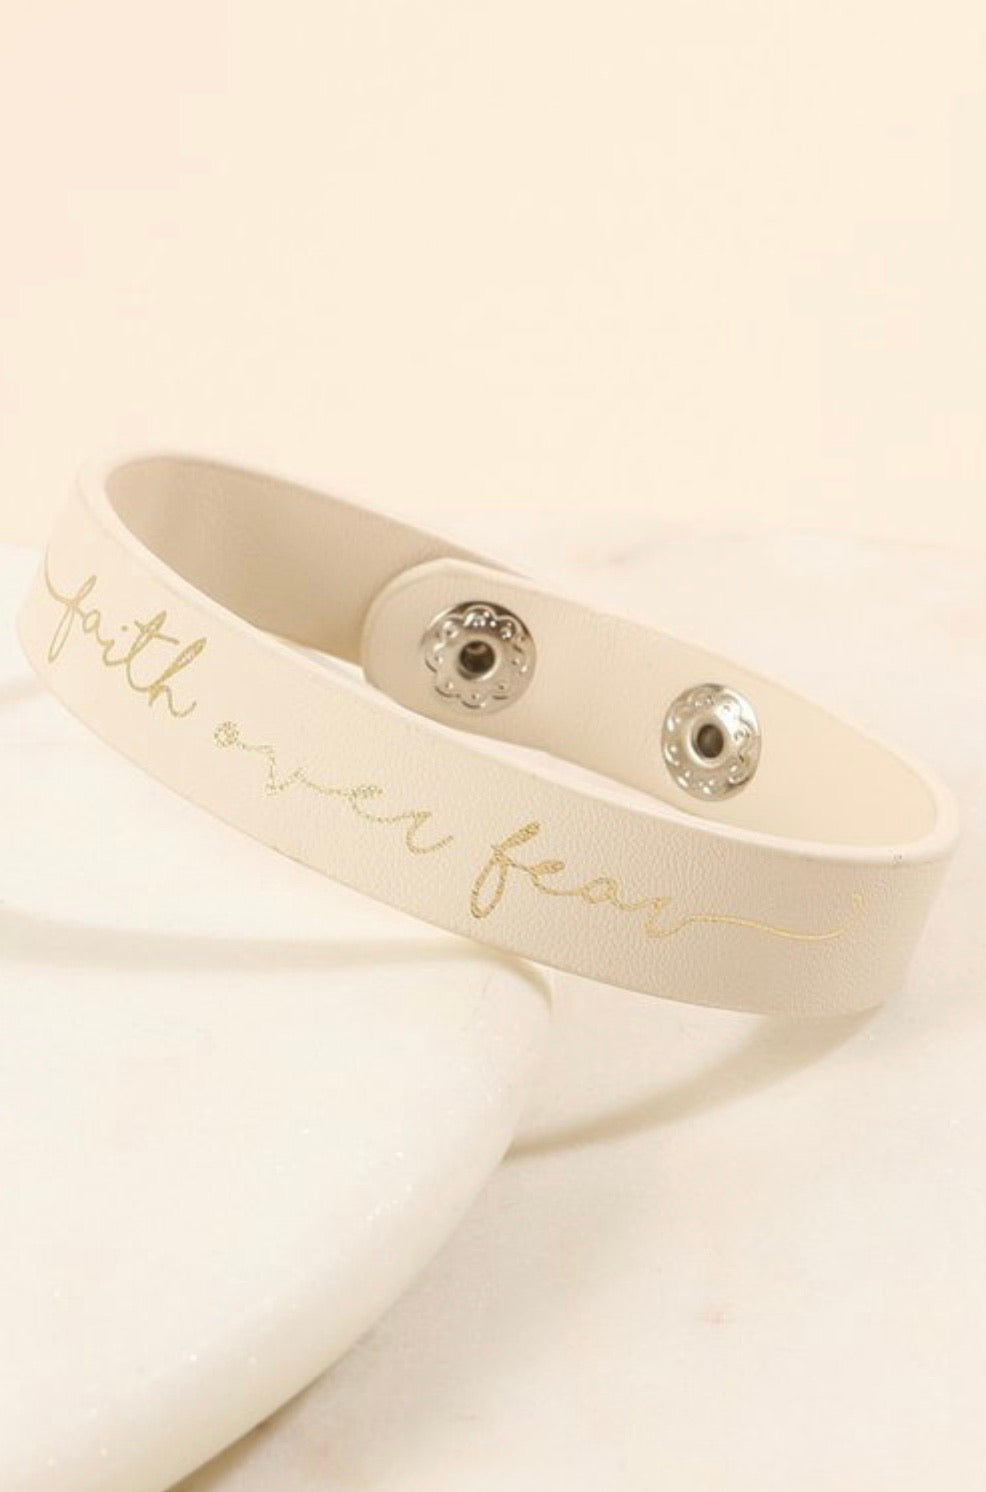 Faith Over Fear Leather Bracelet - Corinne Boutique Family Owned and Operated USA